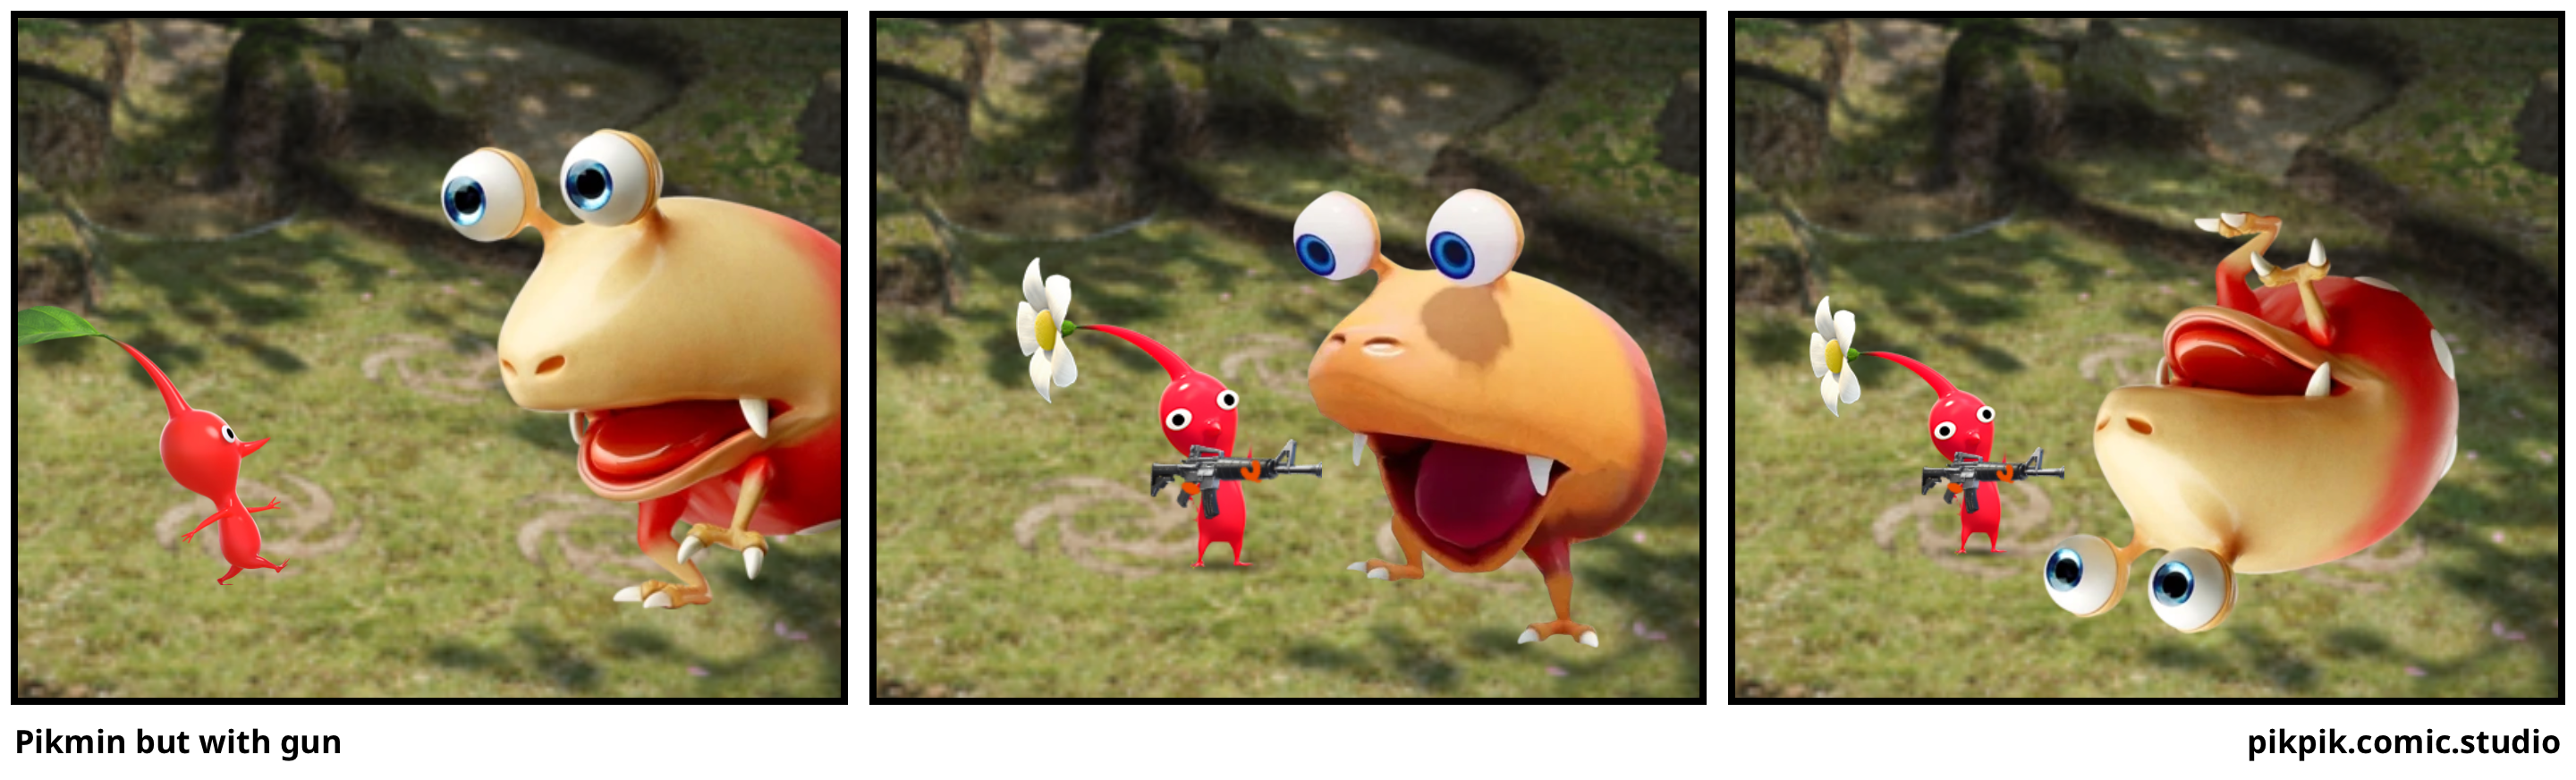 Pikmin but with gun